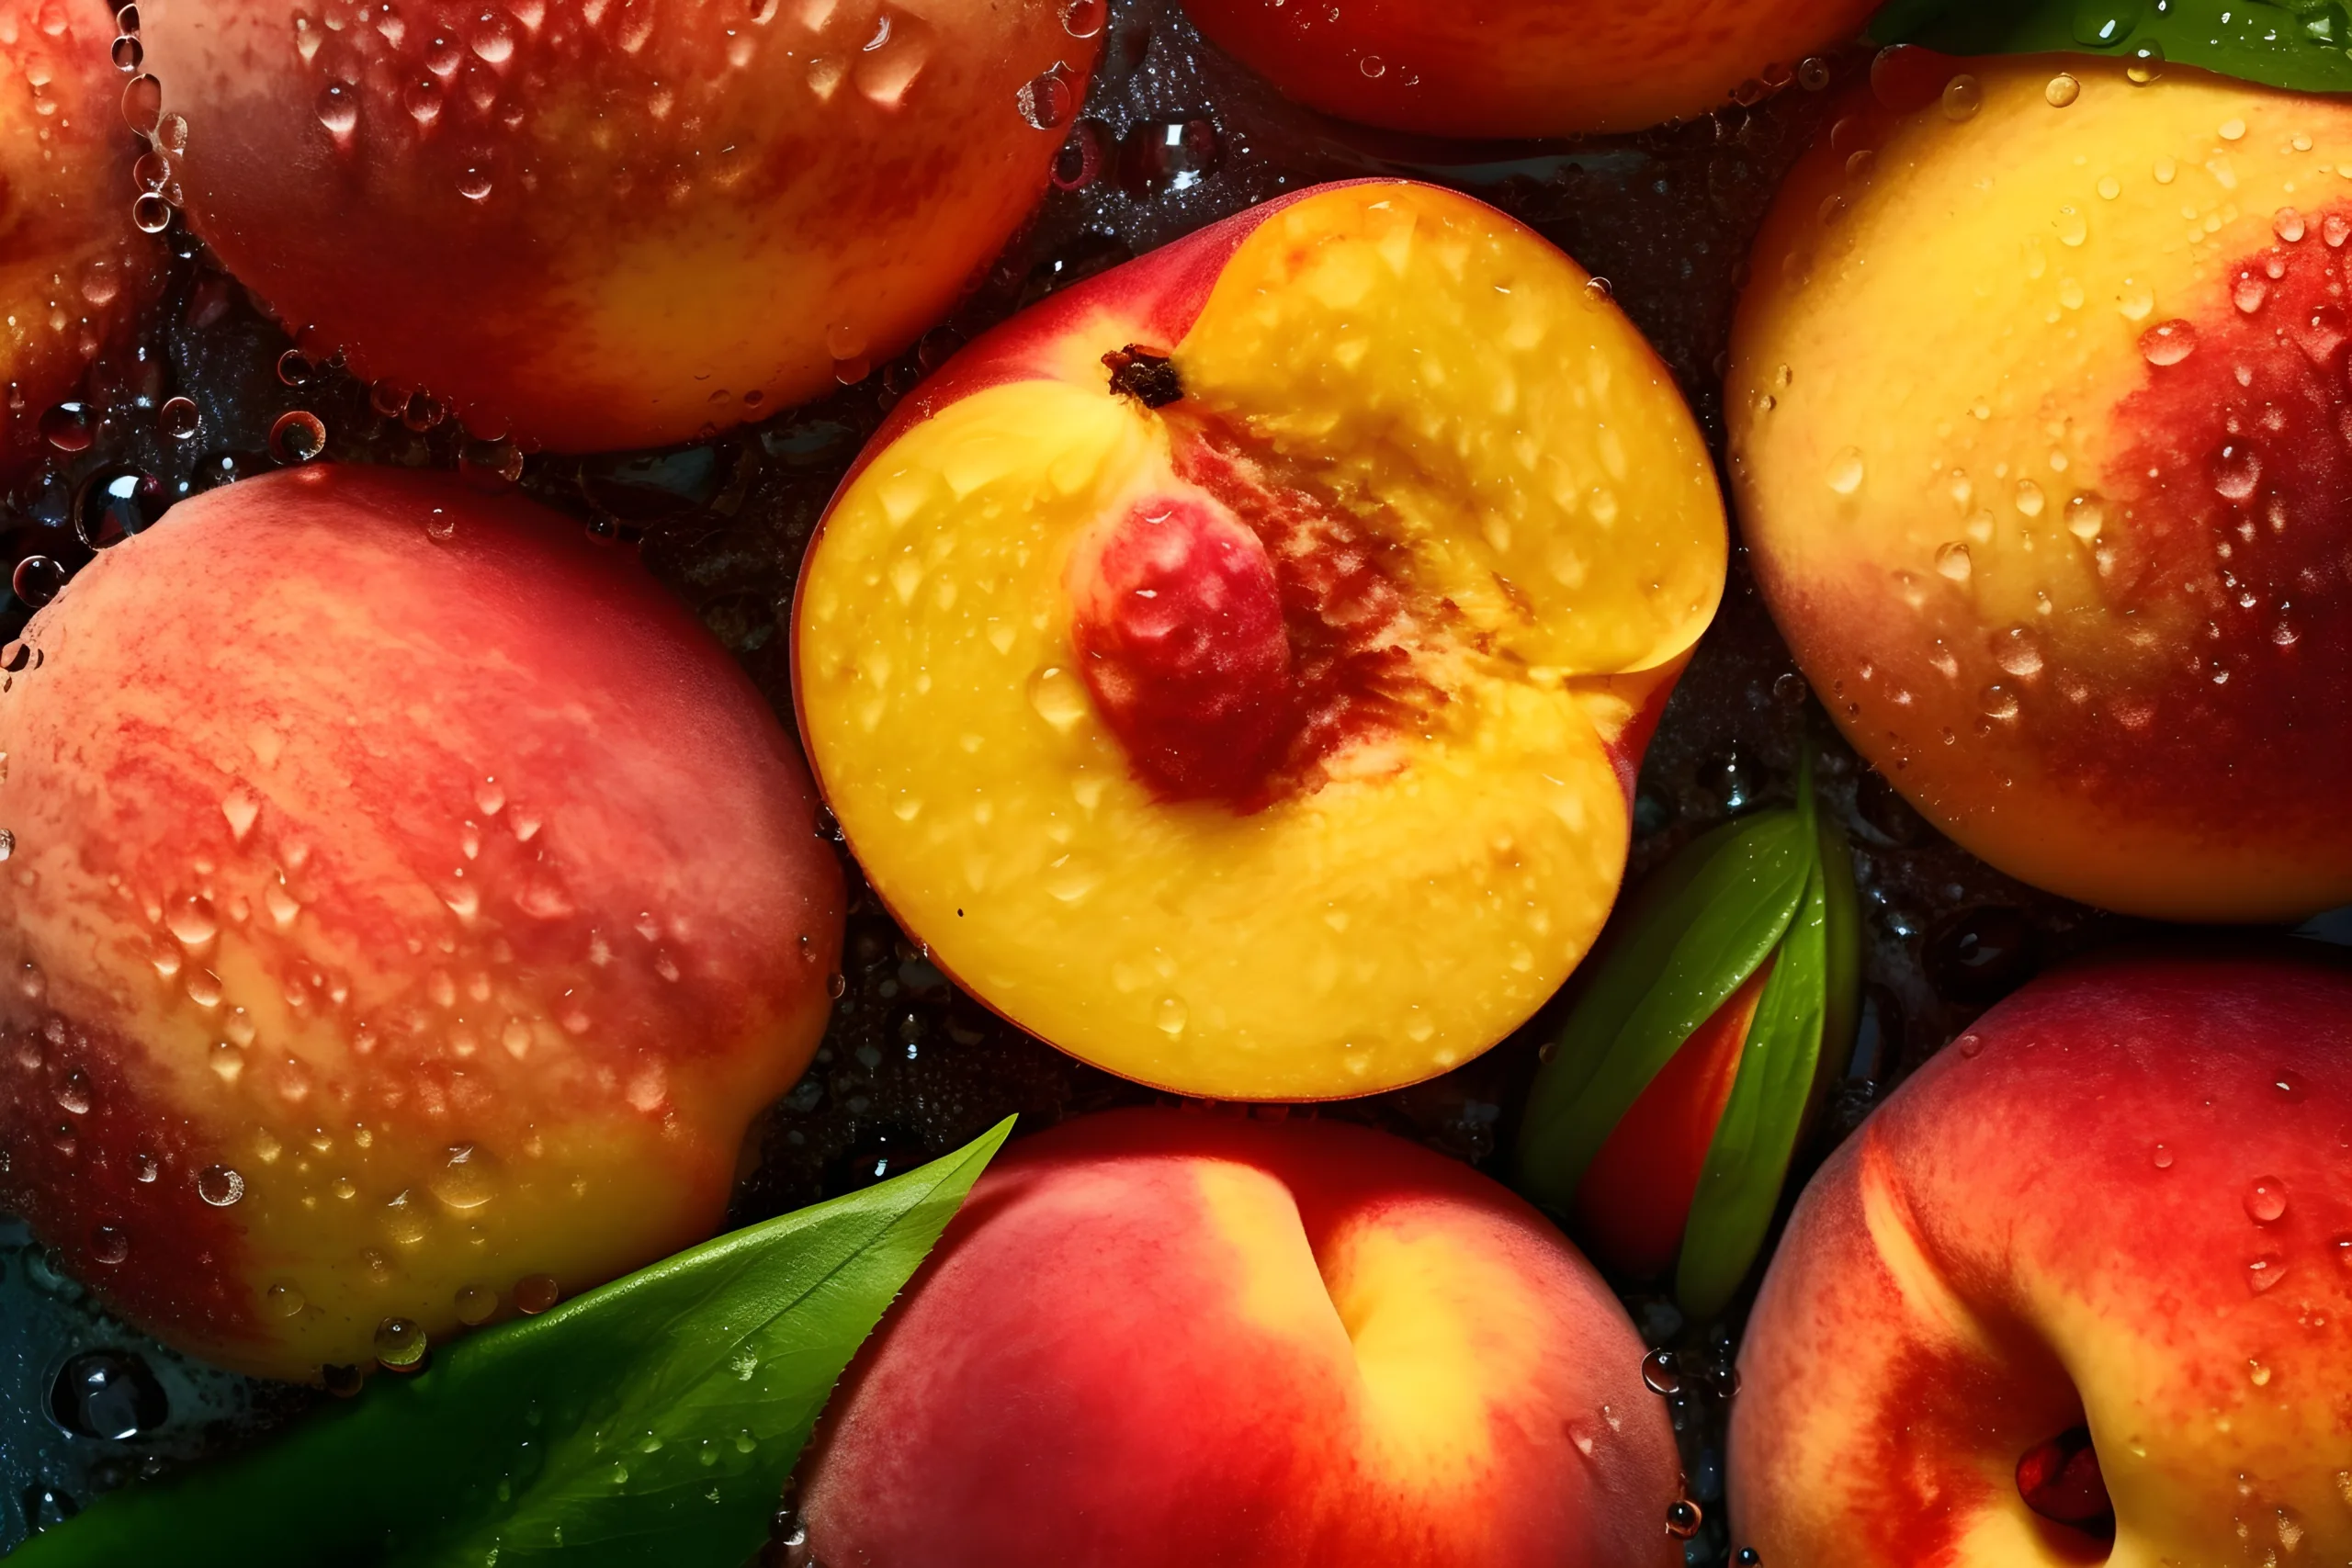 featured image of nectarines